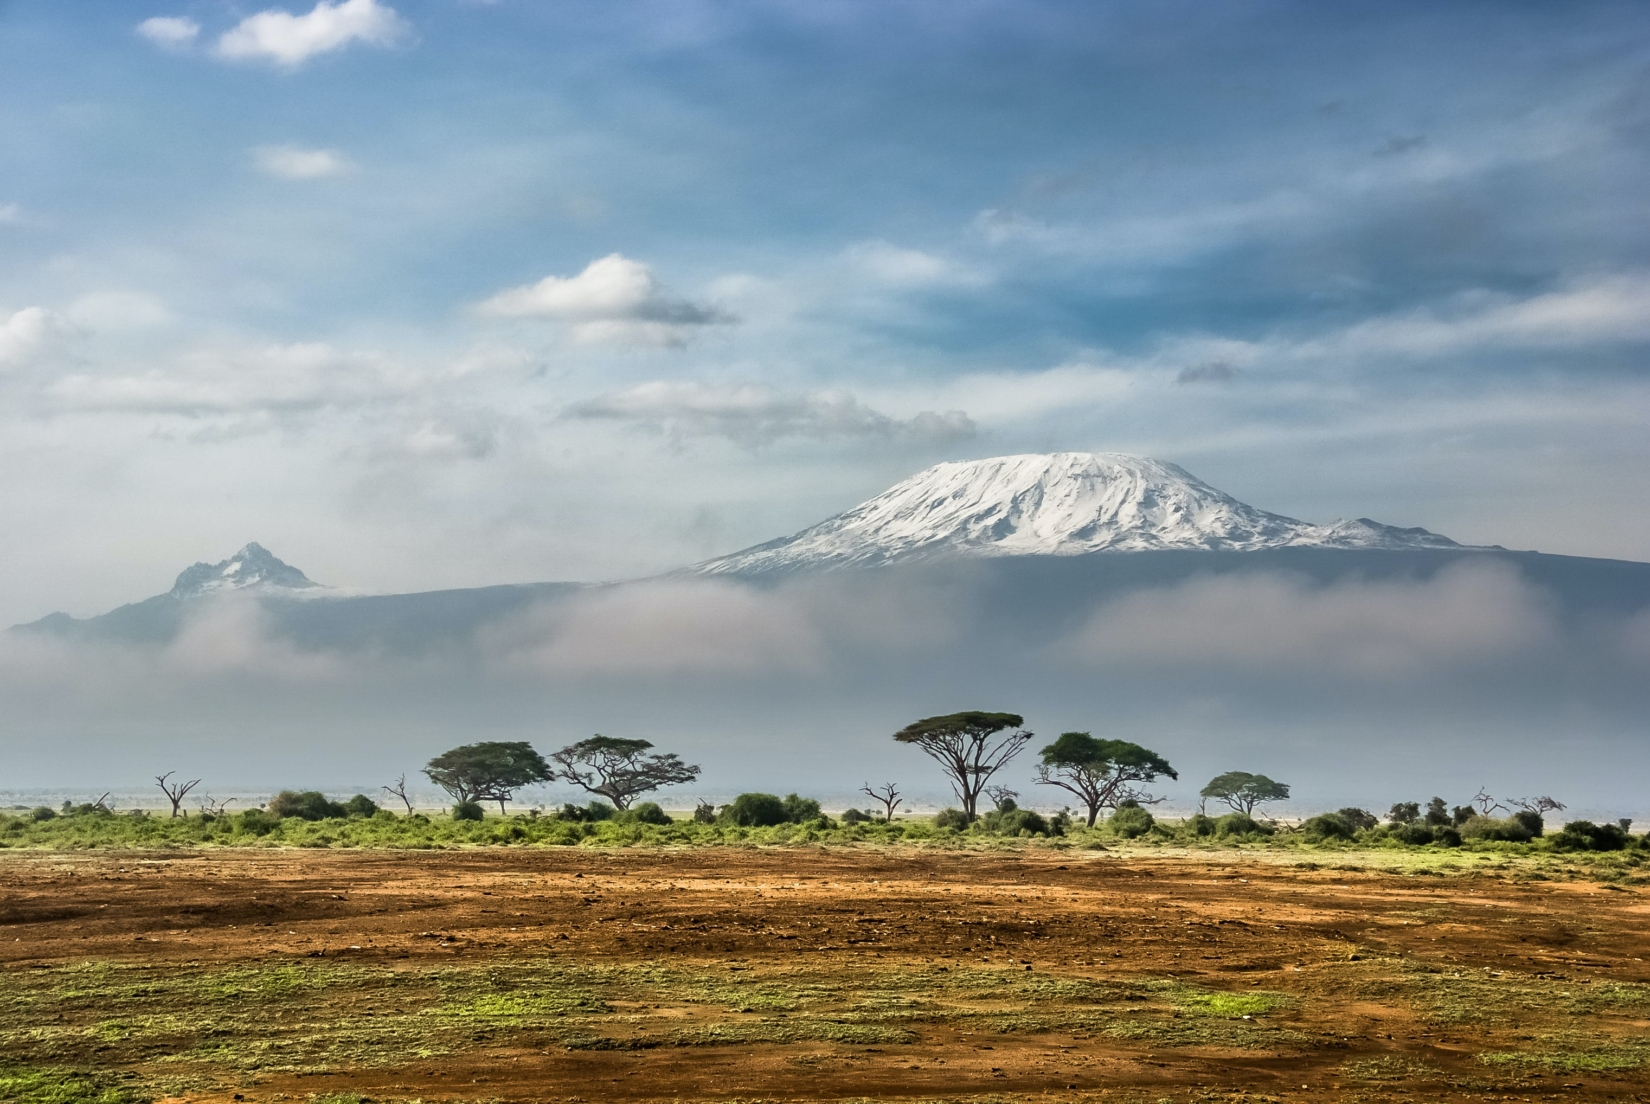 View of Mount Kilimanjaro from Amboseli National Park, overlooking a grass field